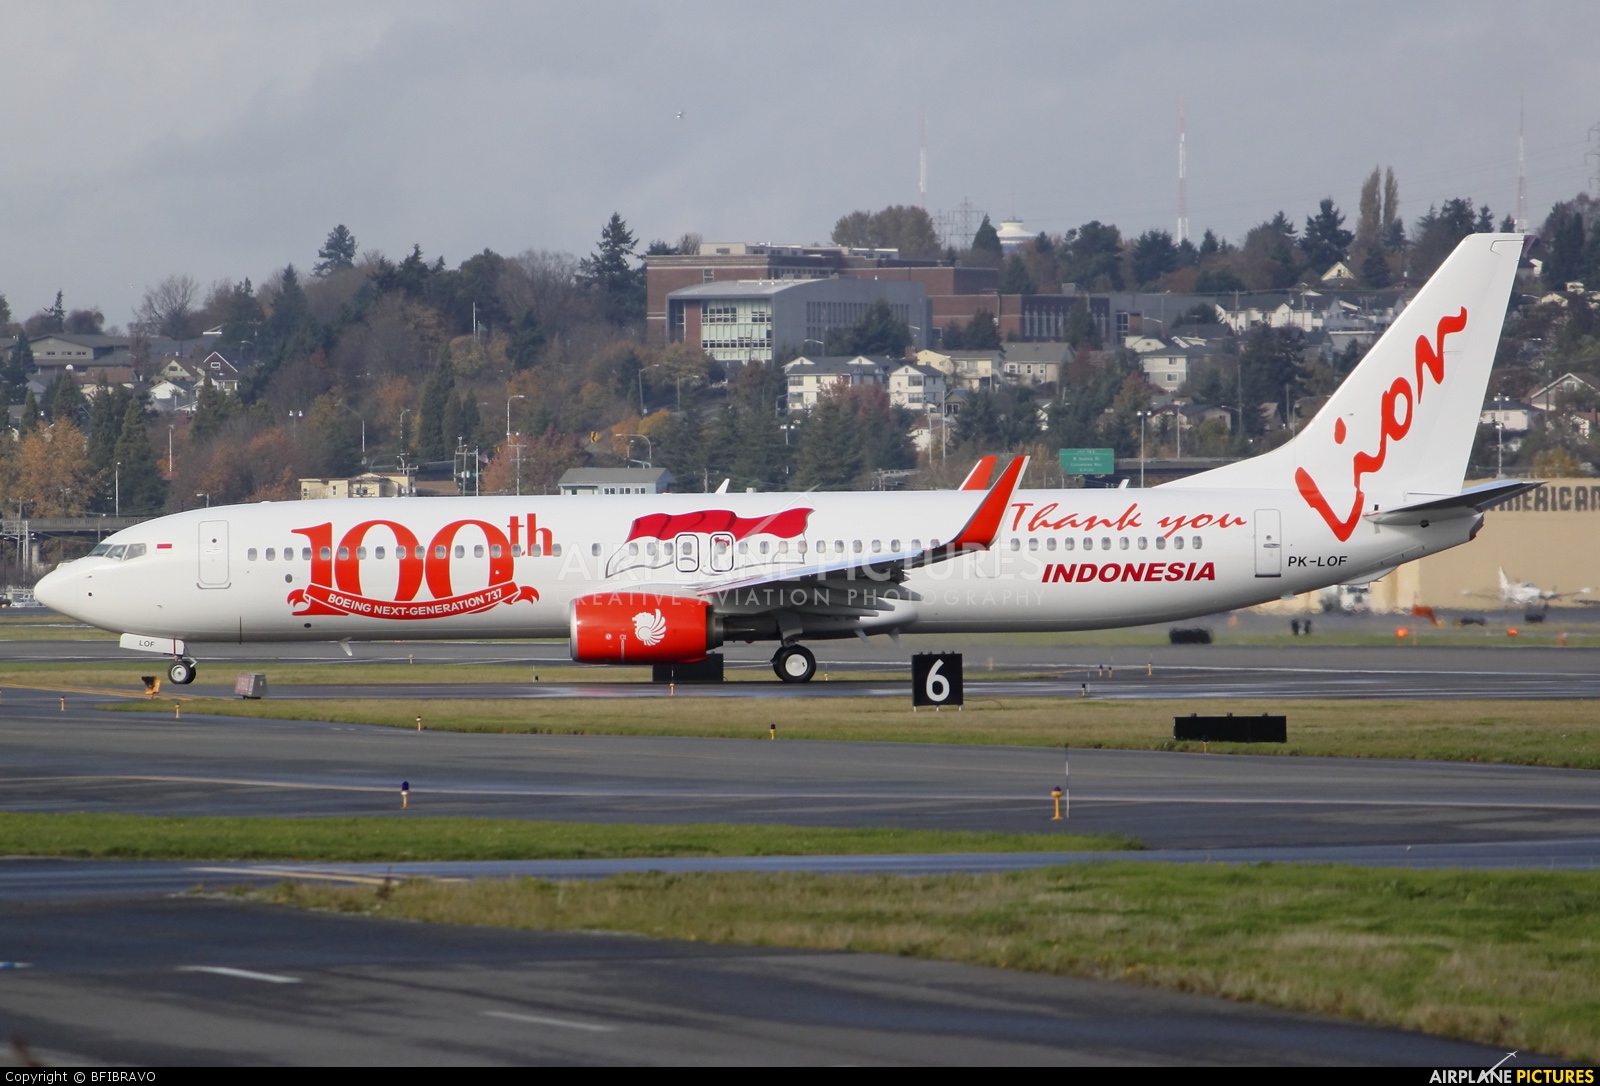 Lion Airlines PK-LOF aircraft at Seattle - Boeing Field / King County Intl